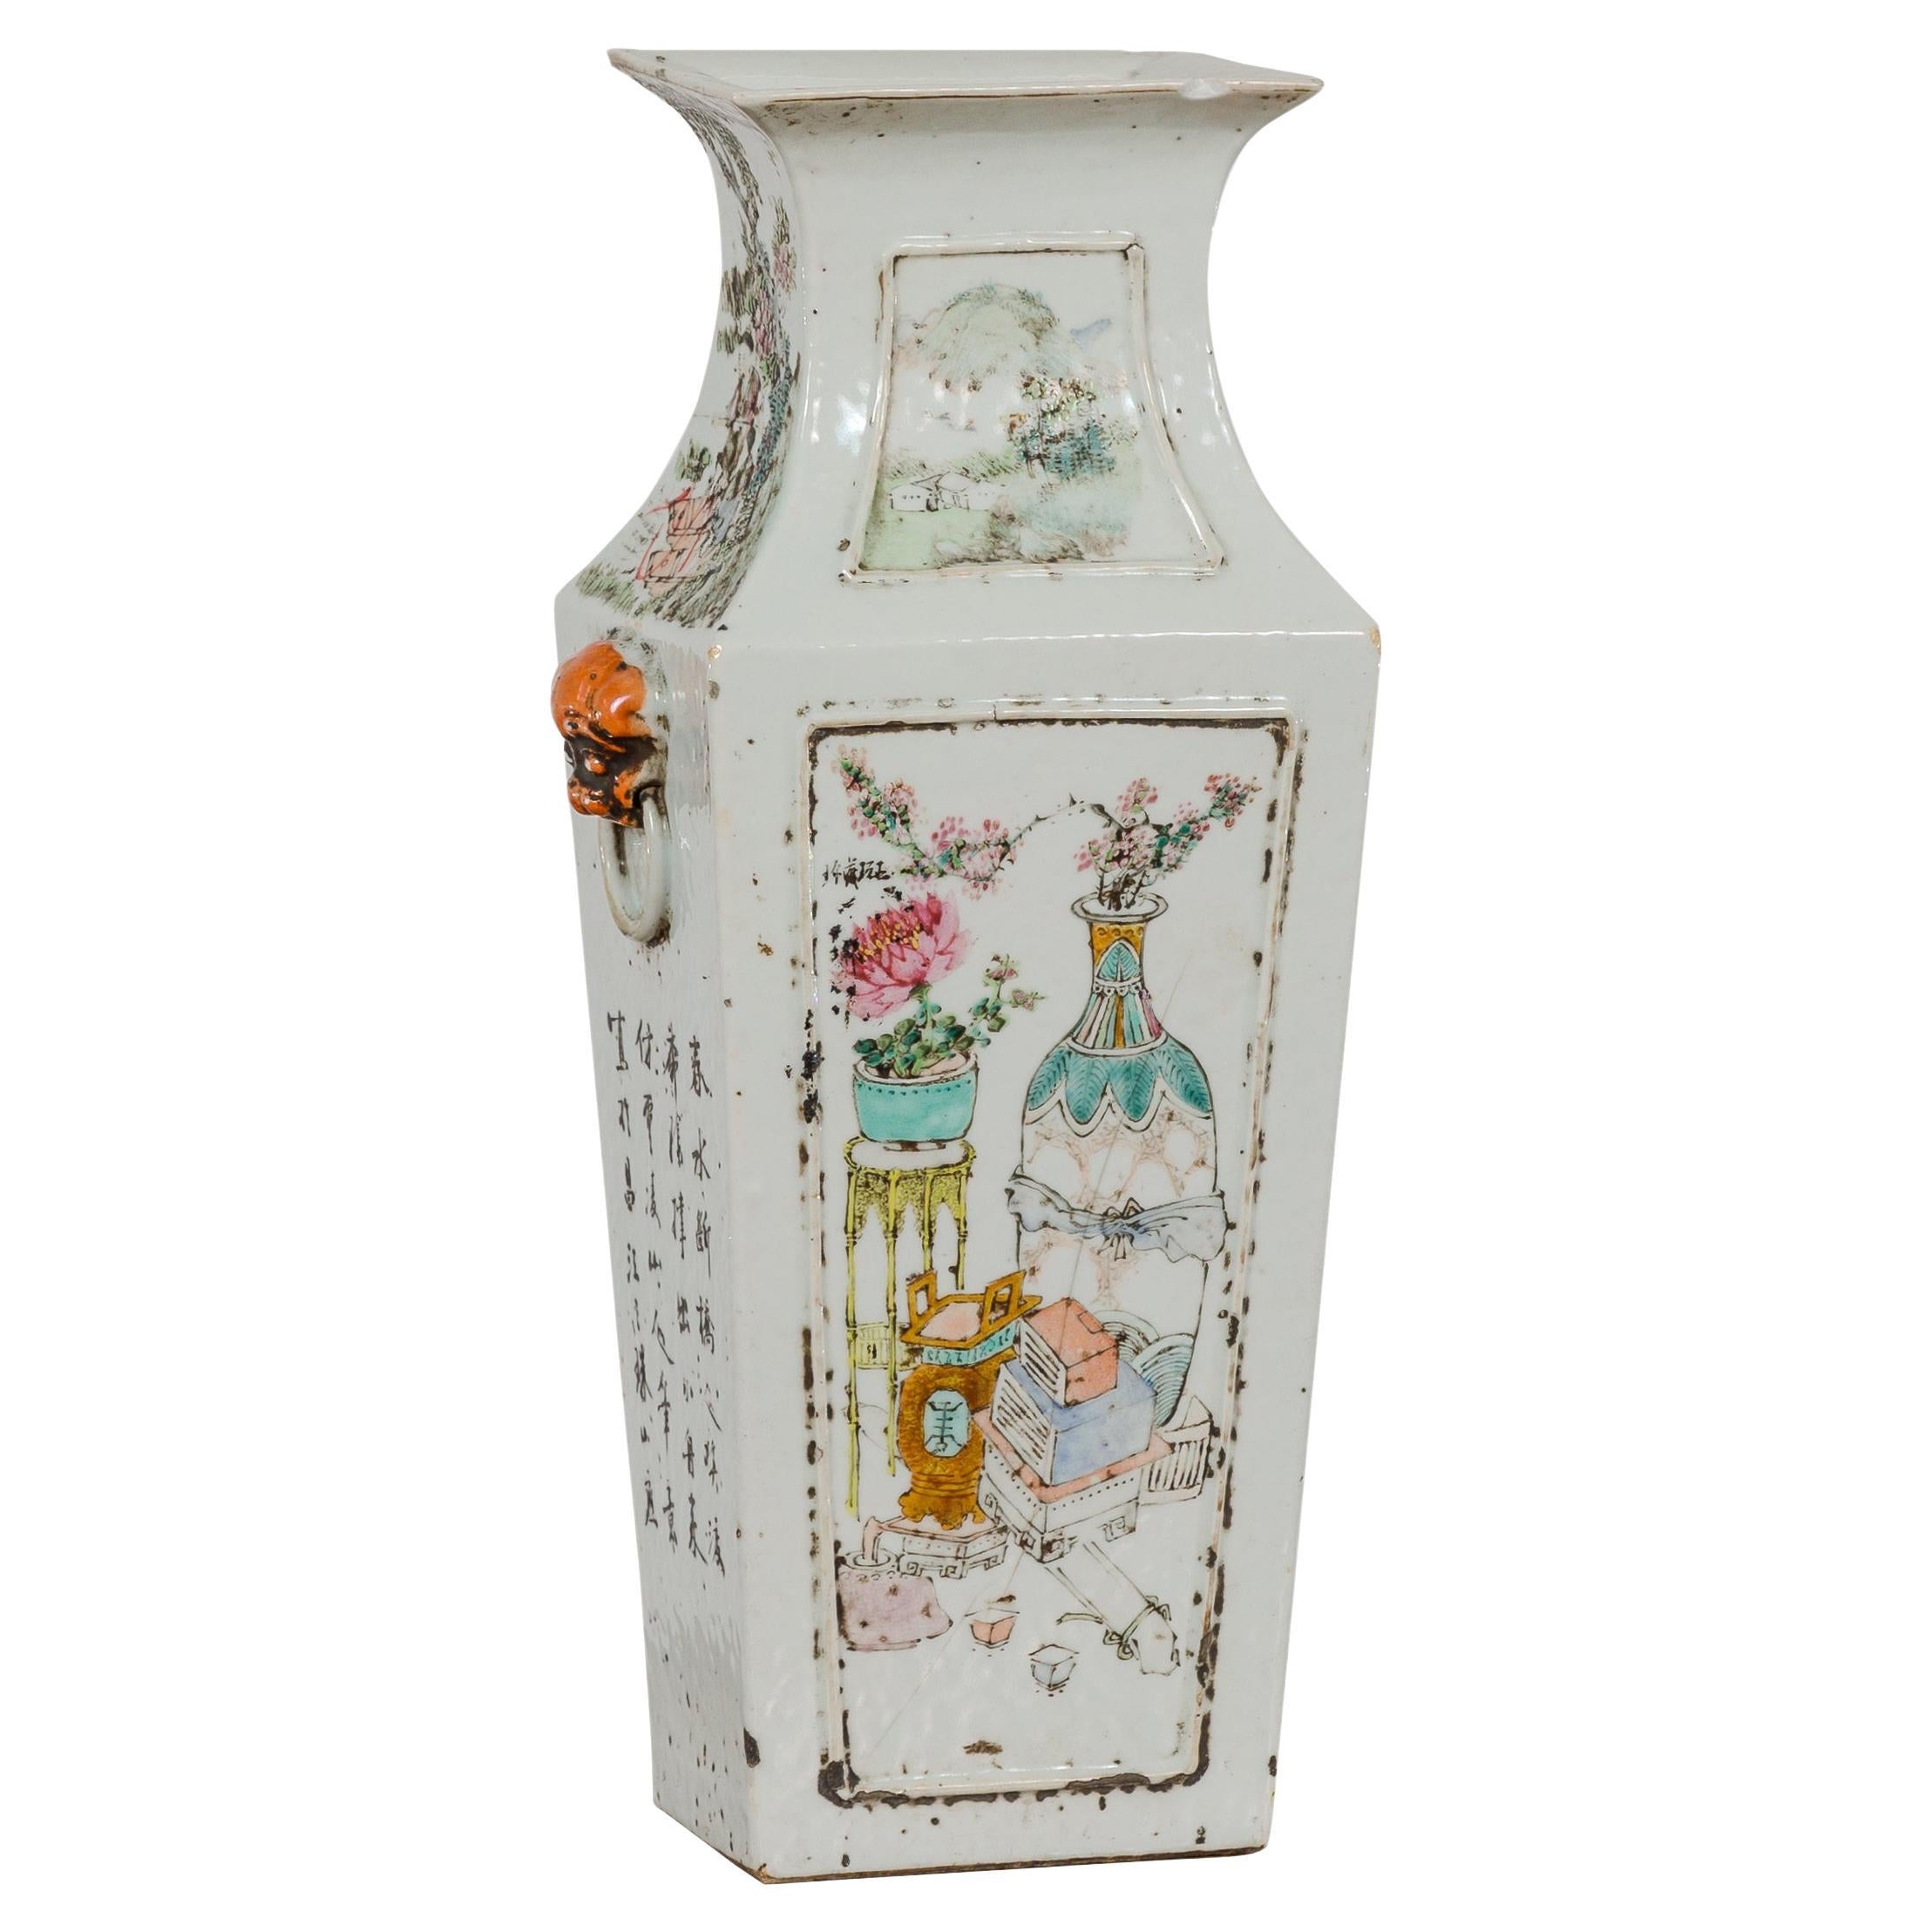 Qing Dynasty White Porcelain Vase with Painted Flowers, Objects and Calligraphy For Sale